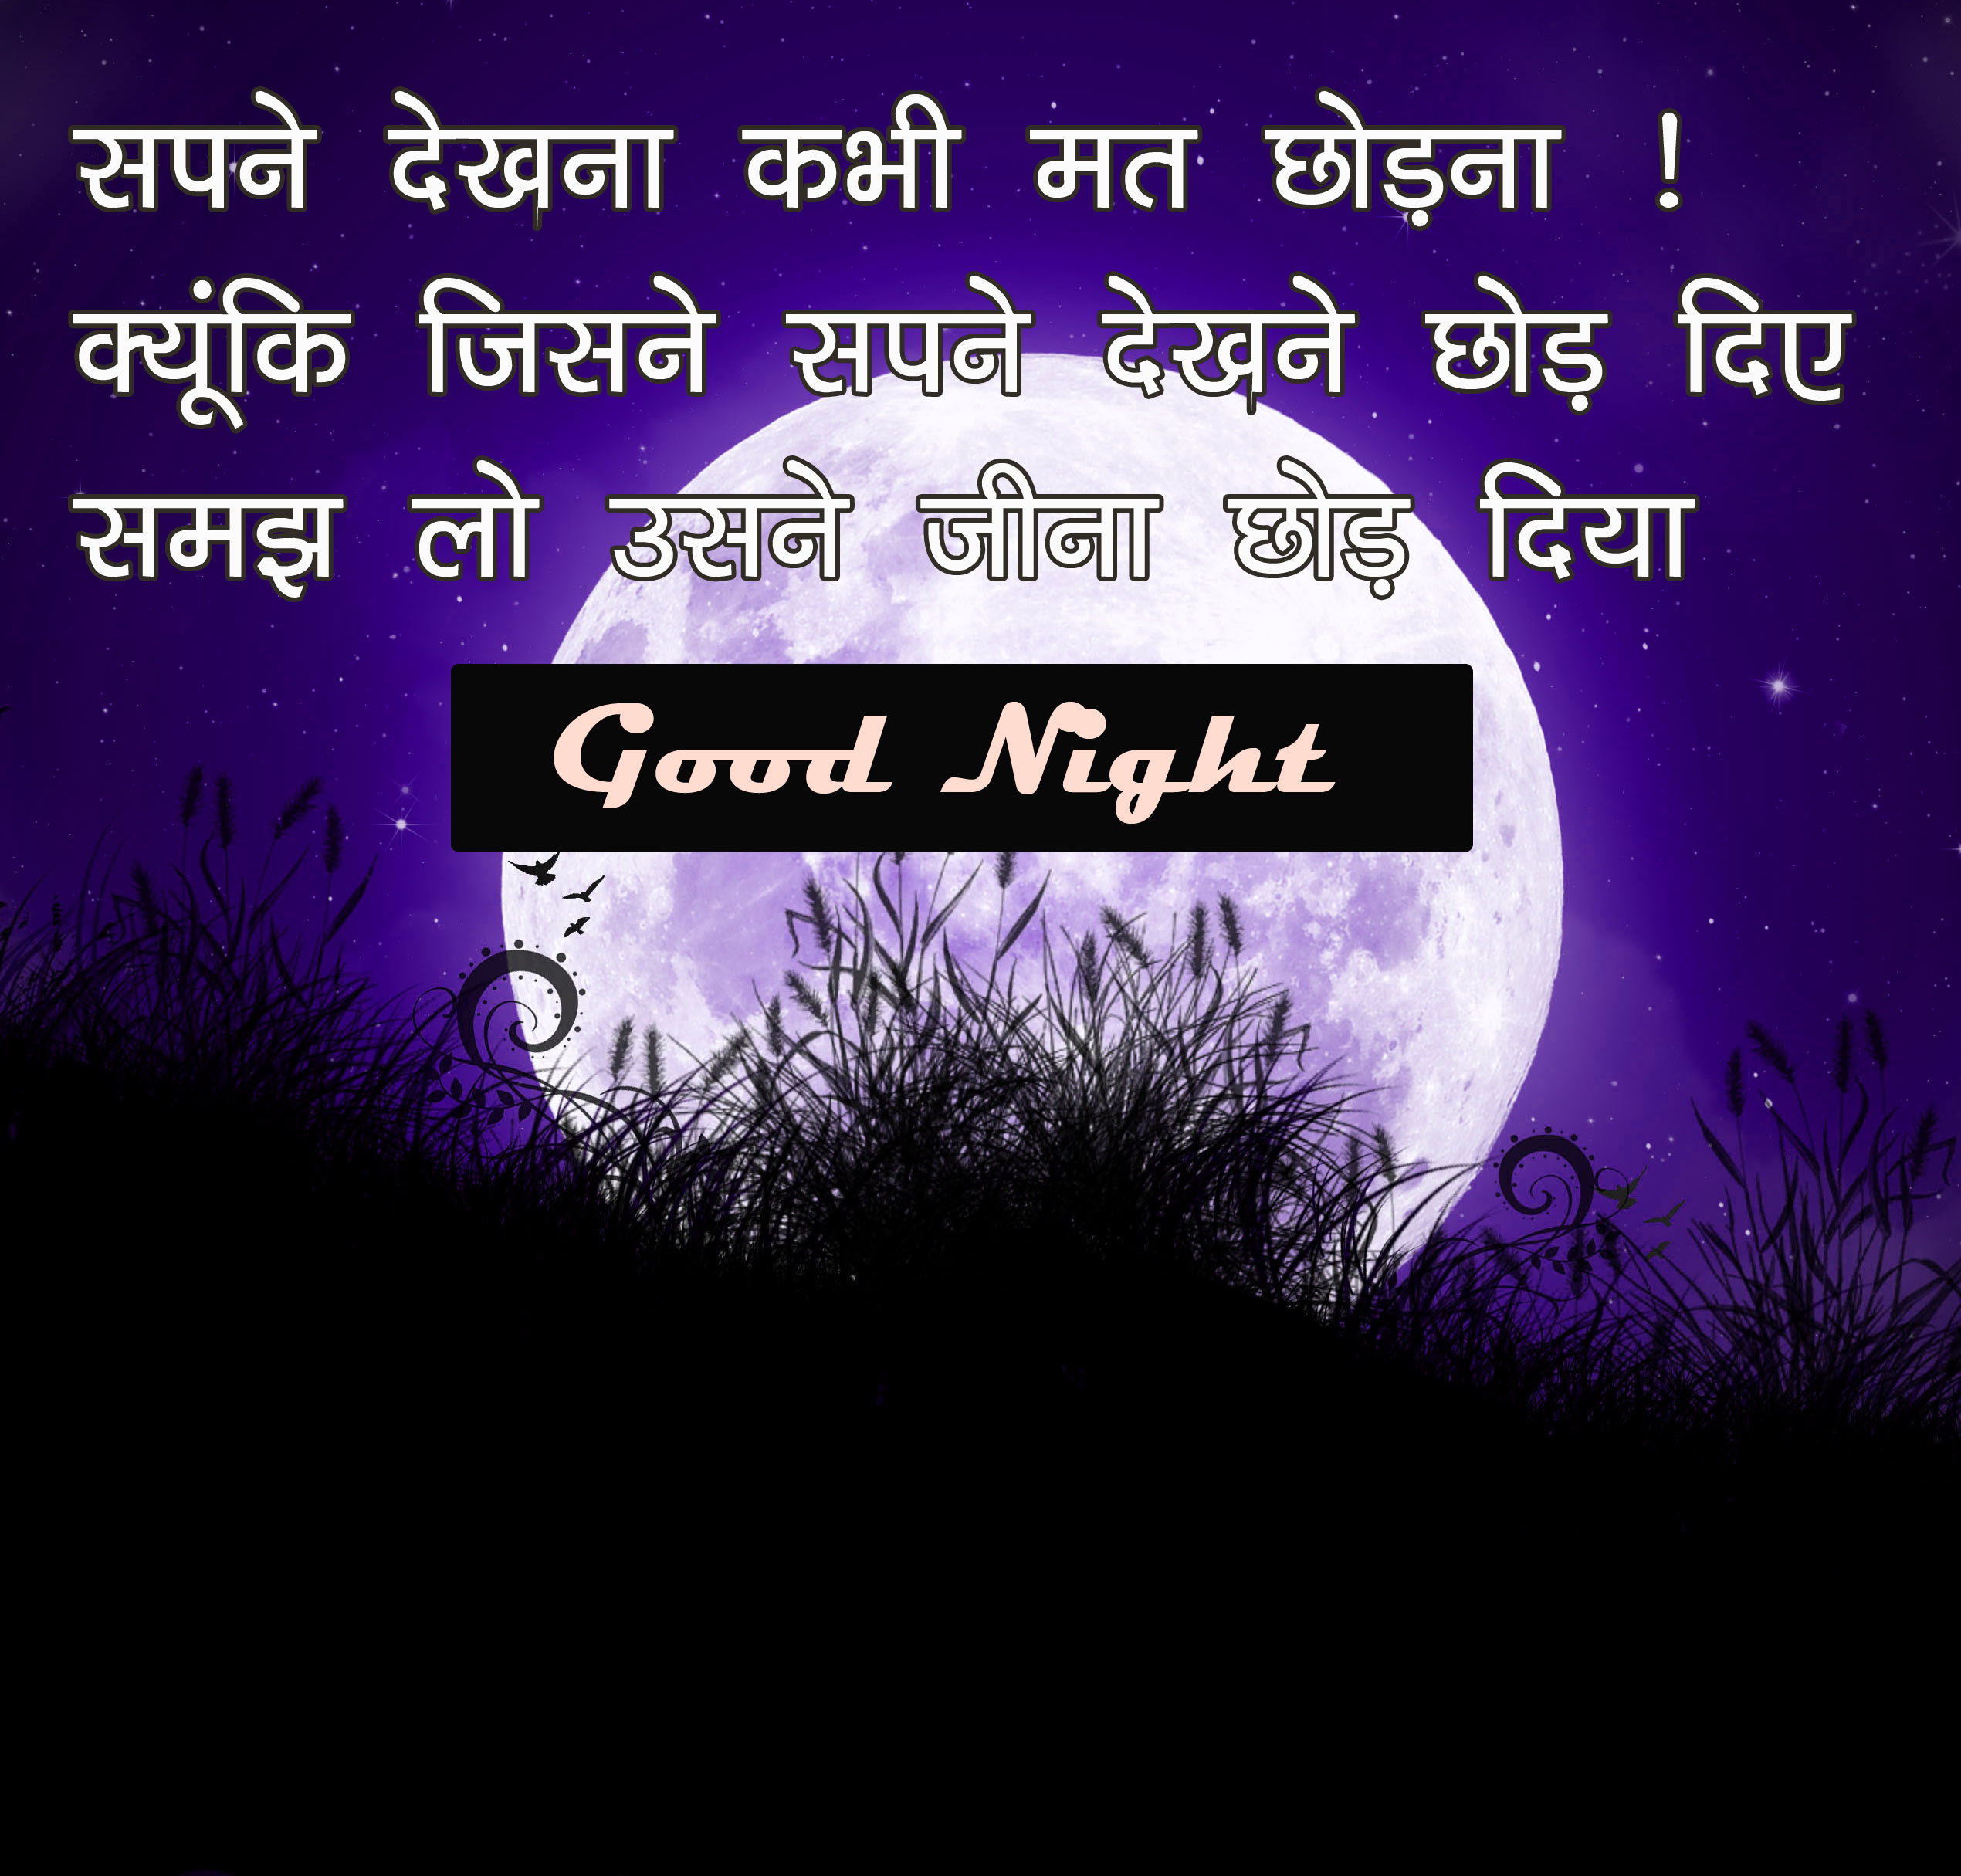 Hindi Motivational Quotes Good Night  Pictures Free